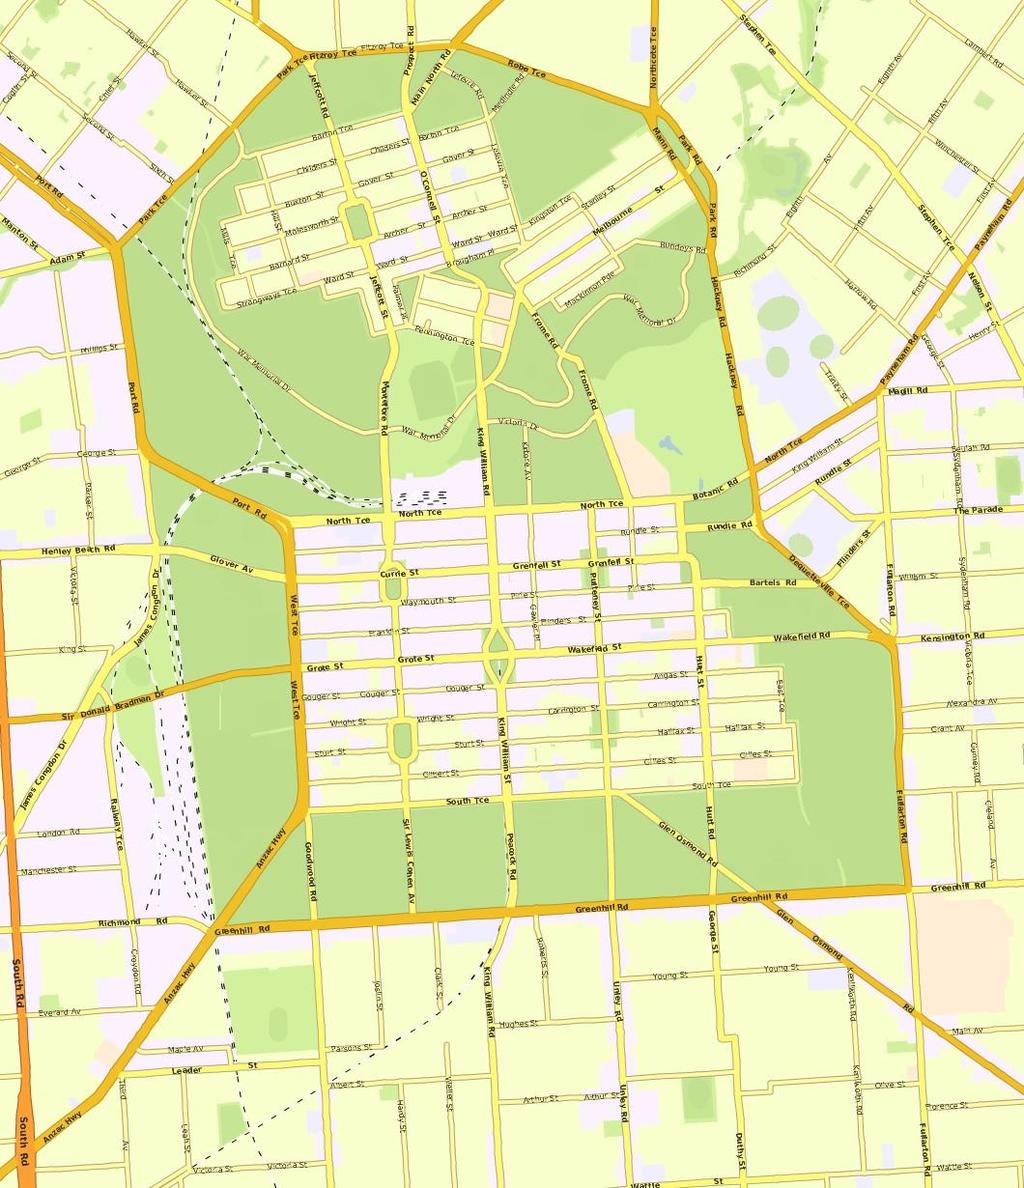 ADELAIDE Suburb Map Prepared on 6/0/07 by YOUR PROPERTY EXPERT, 08 8 5900 at Ray White Adelaide. Property Data Solutions Pty Ltd 07 (pricefinder.com.